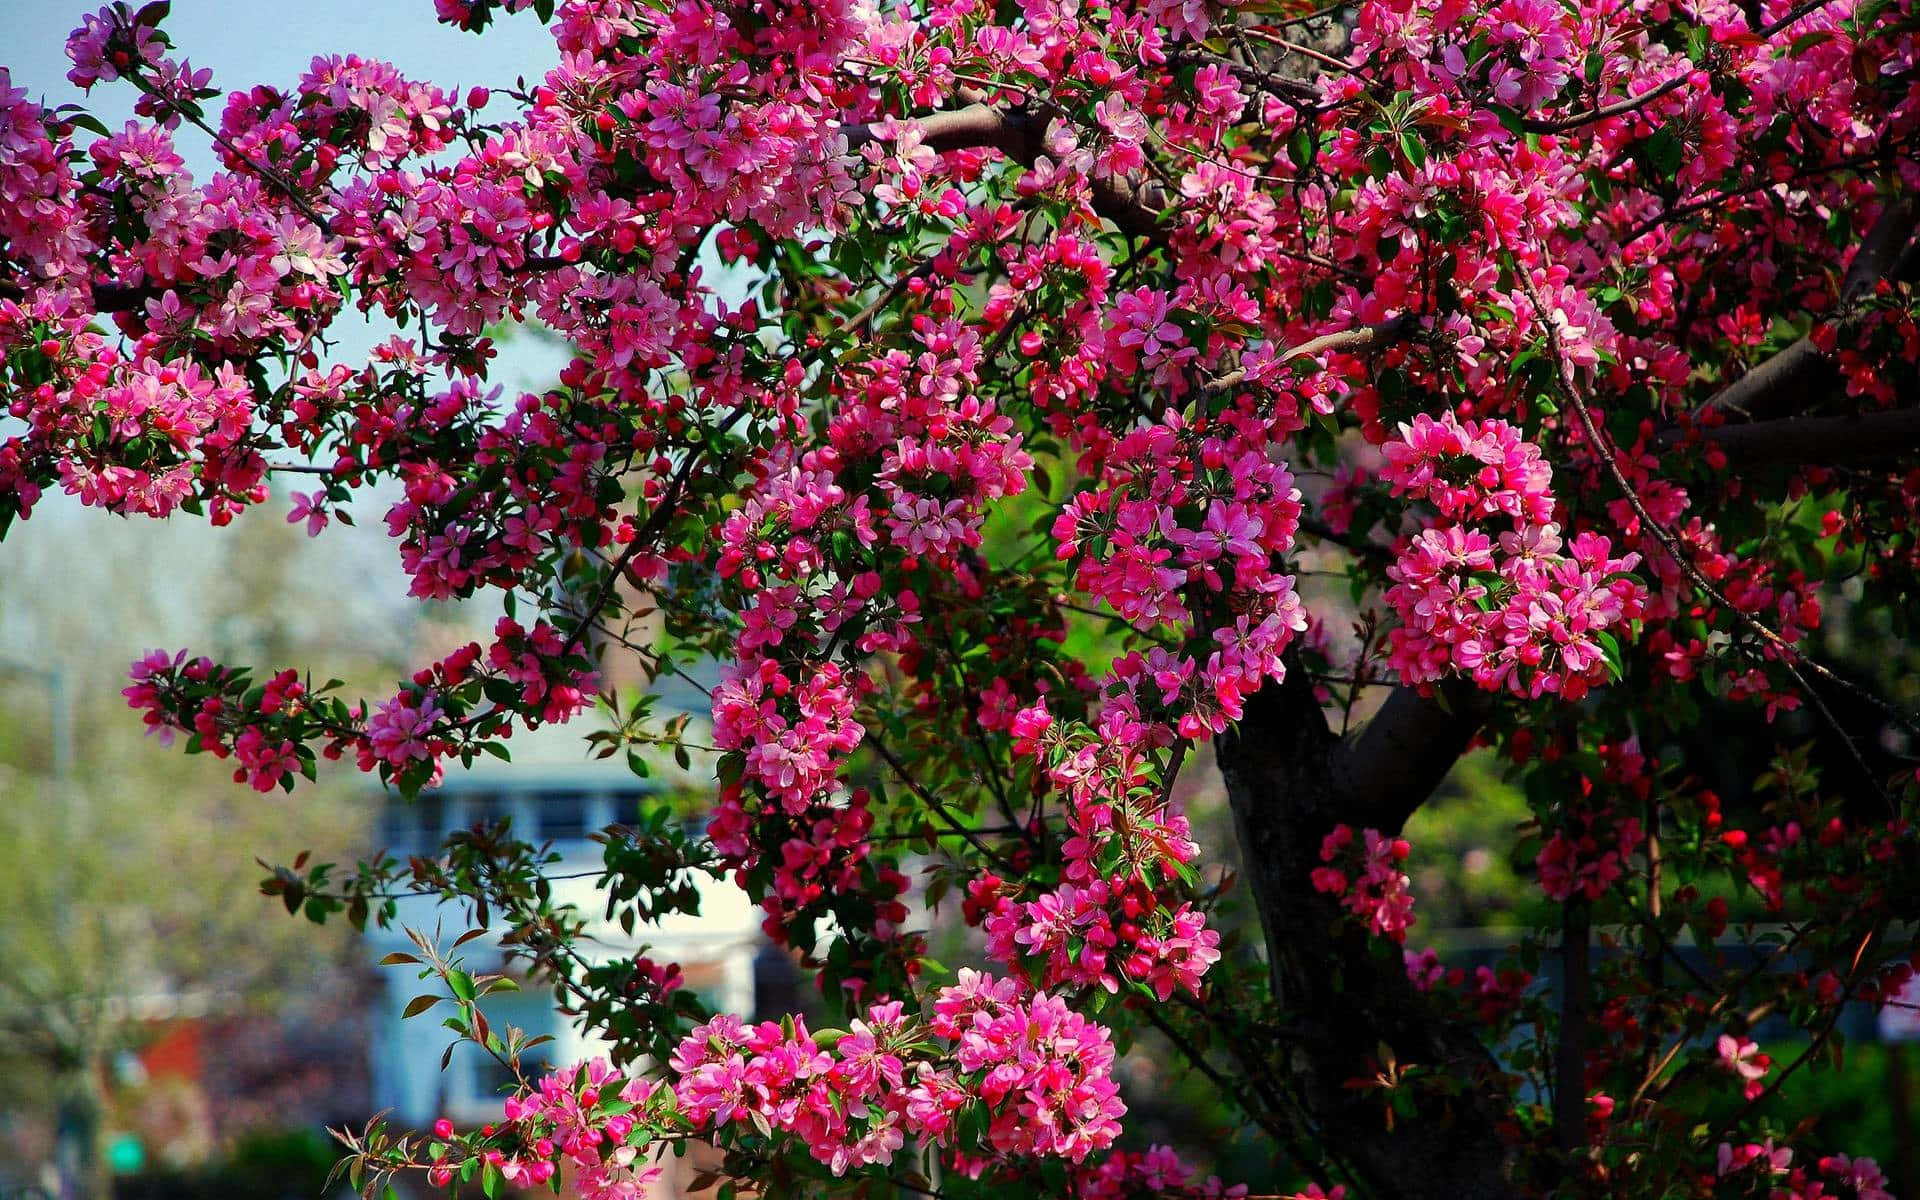 Caption: Blossoming Flower Tree with Colorful Blooms Wallpaper